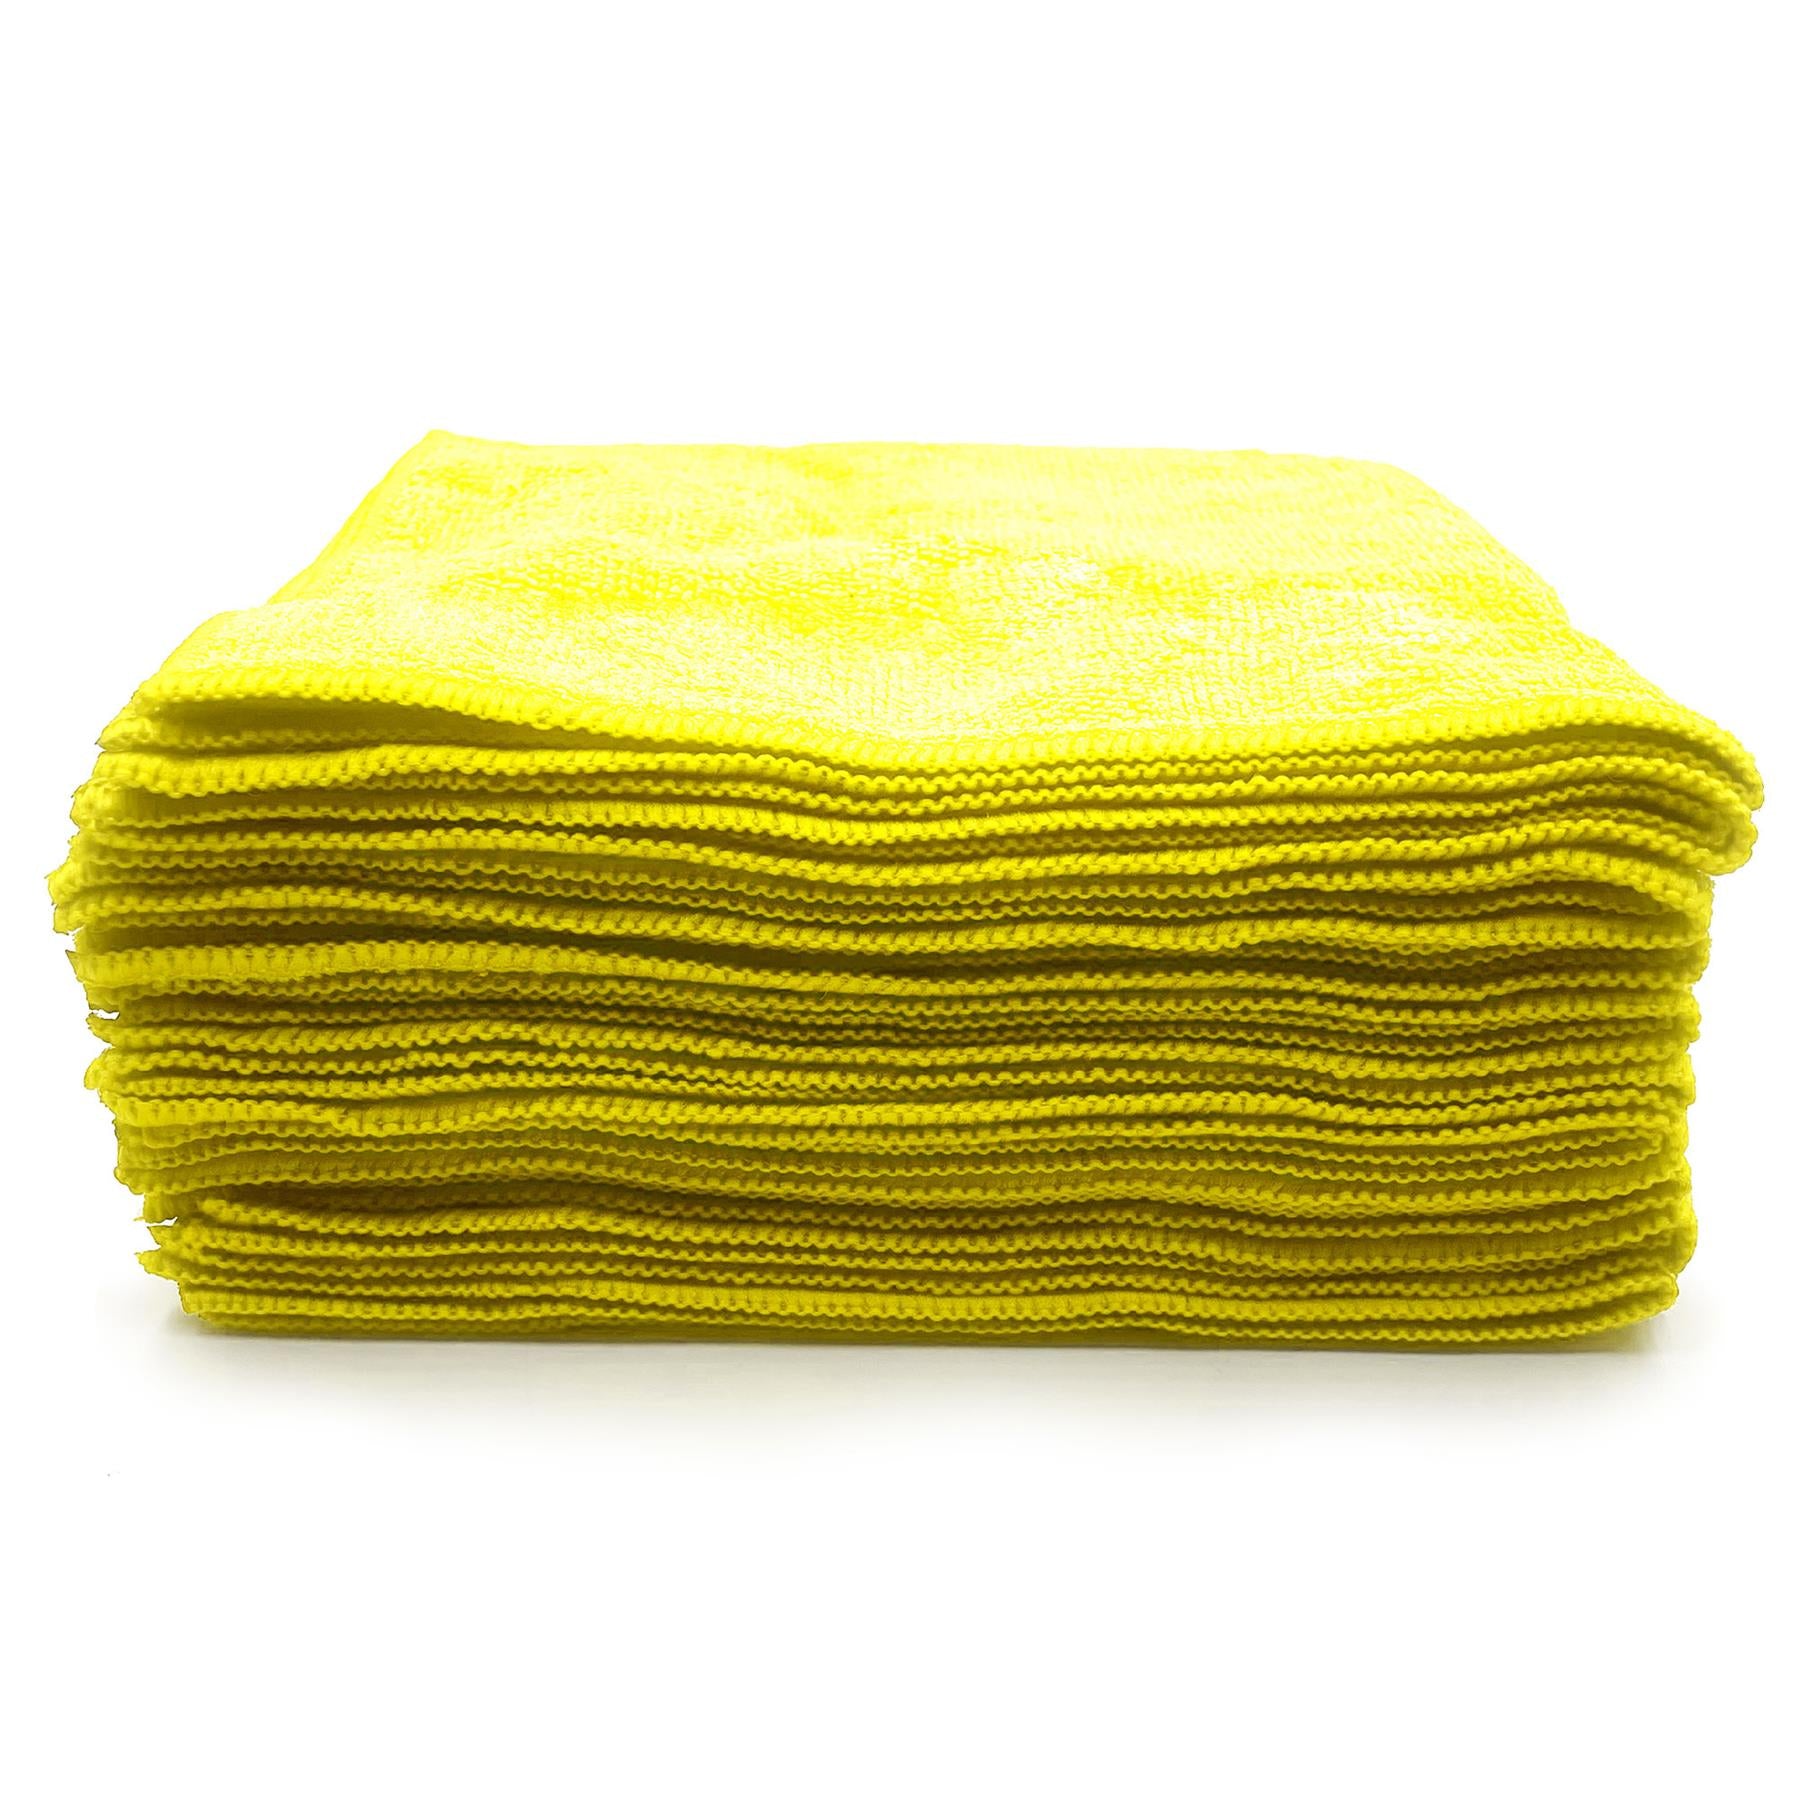 Large Yellow Absorbent Multipurpose Microfibre Cleaning Cloths - Pack of 10